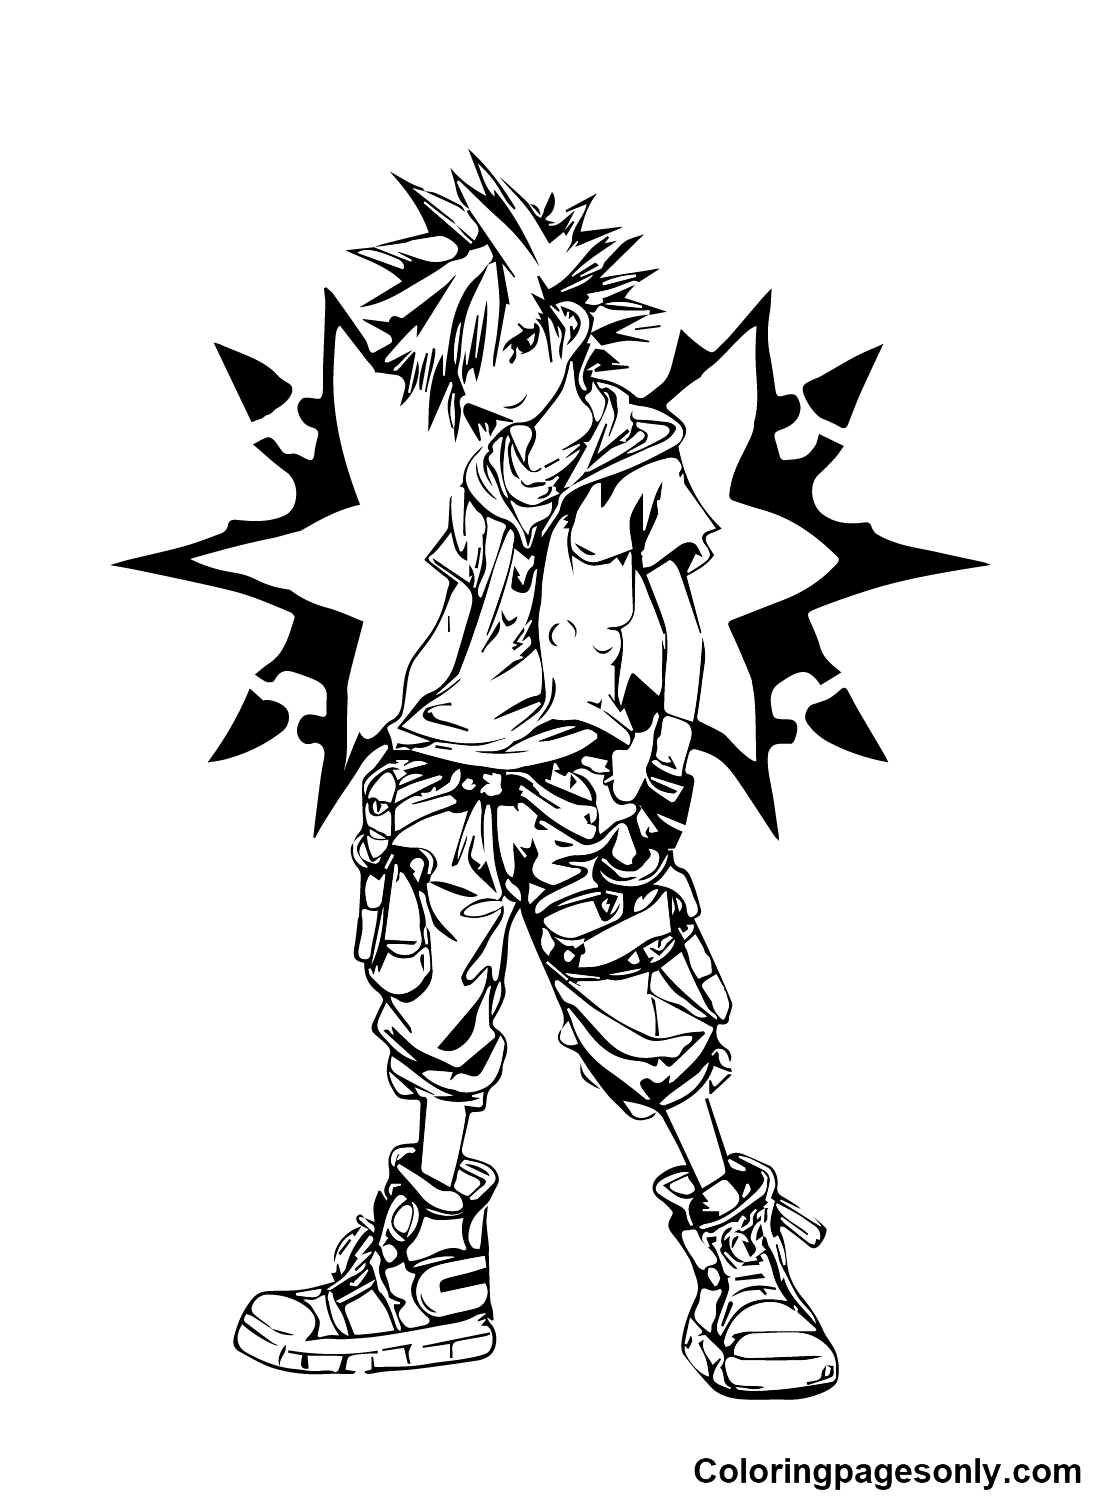 Kingdom Hearts to print Coloring Pages